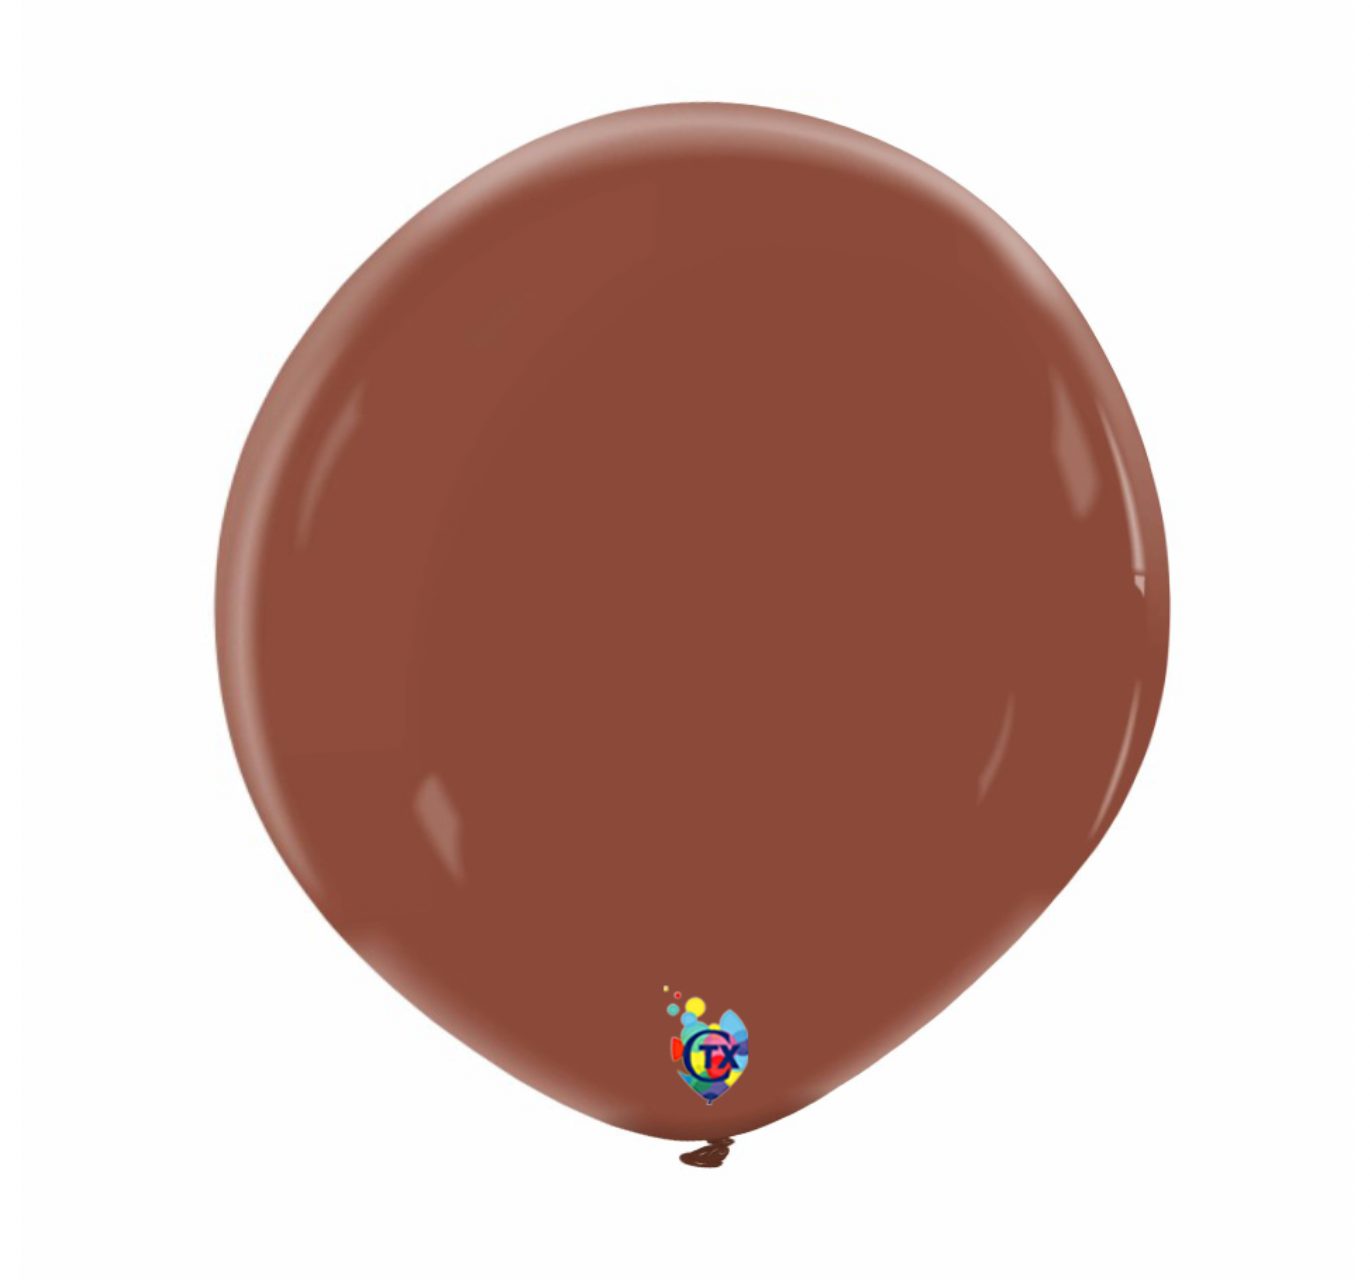 24 inch Chocolate Standard Color Cattex - 2 PC